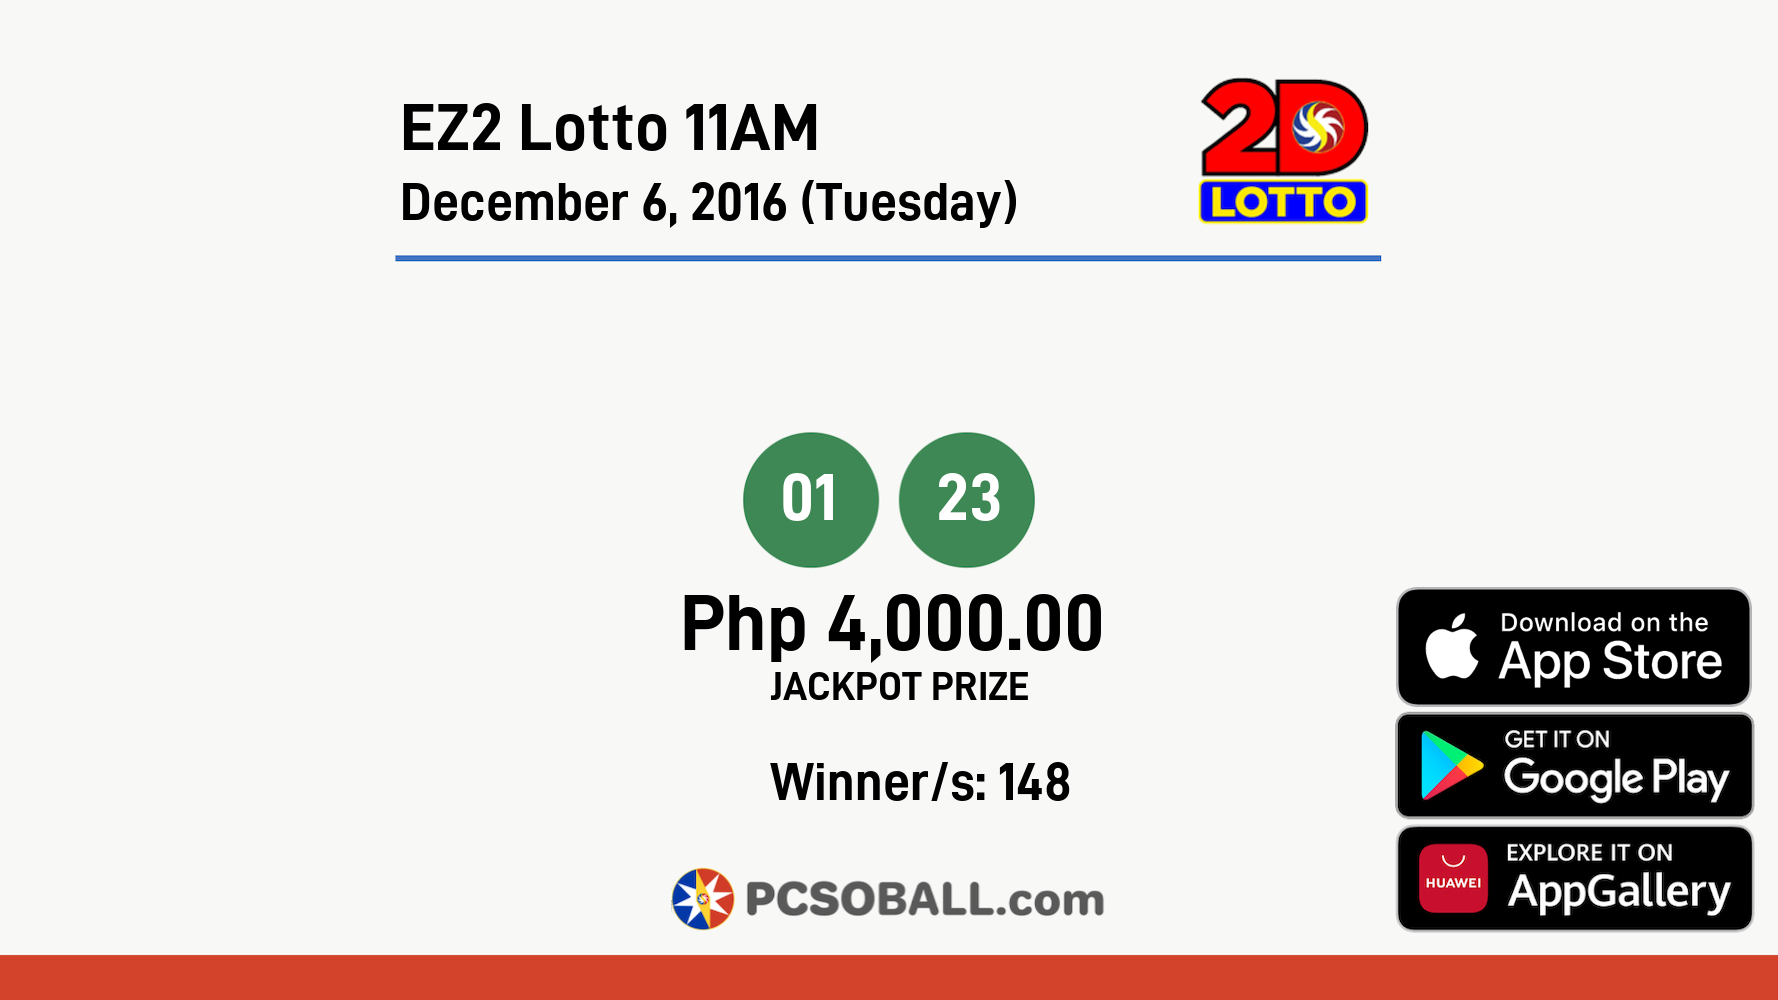 EZ2 Lotto 11AM December 6, 2016 (Tuesday) Result